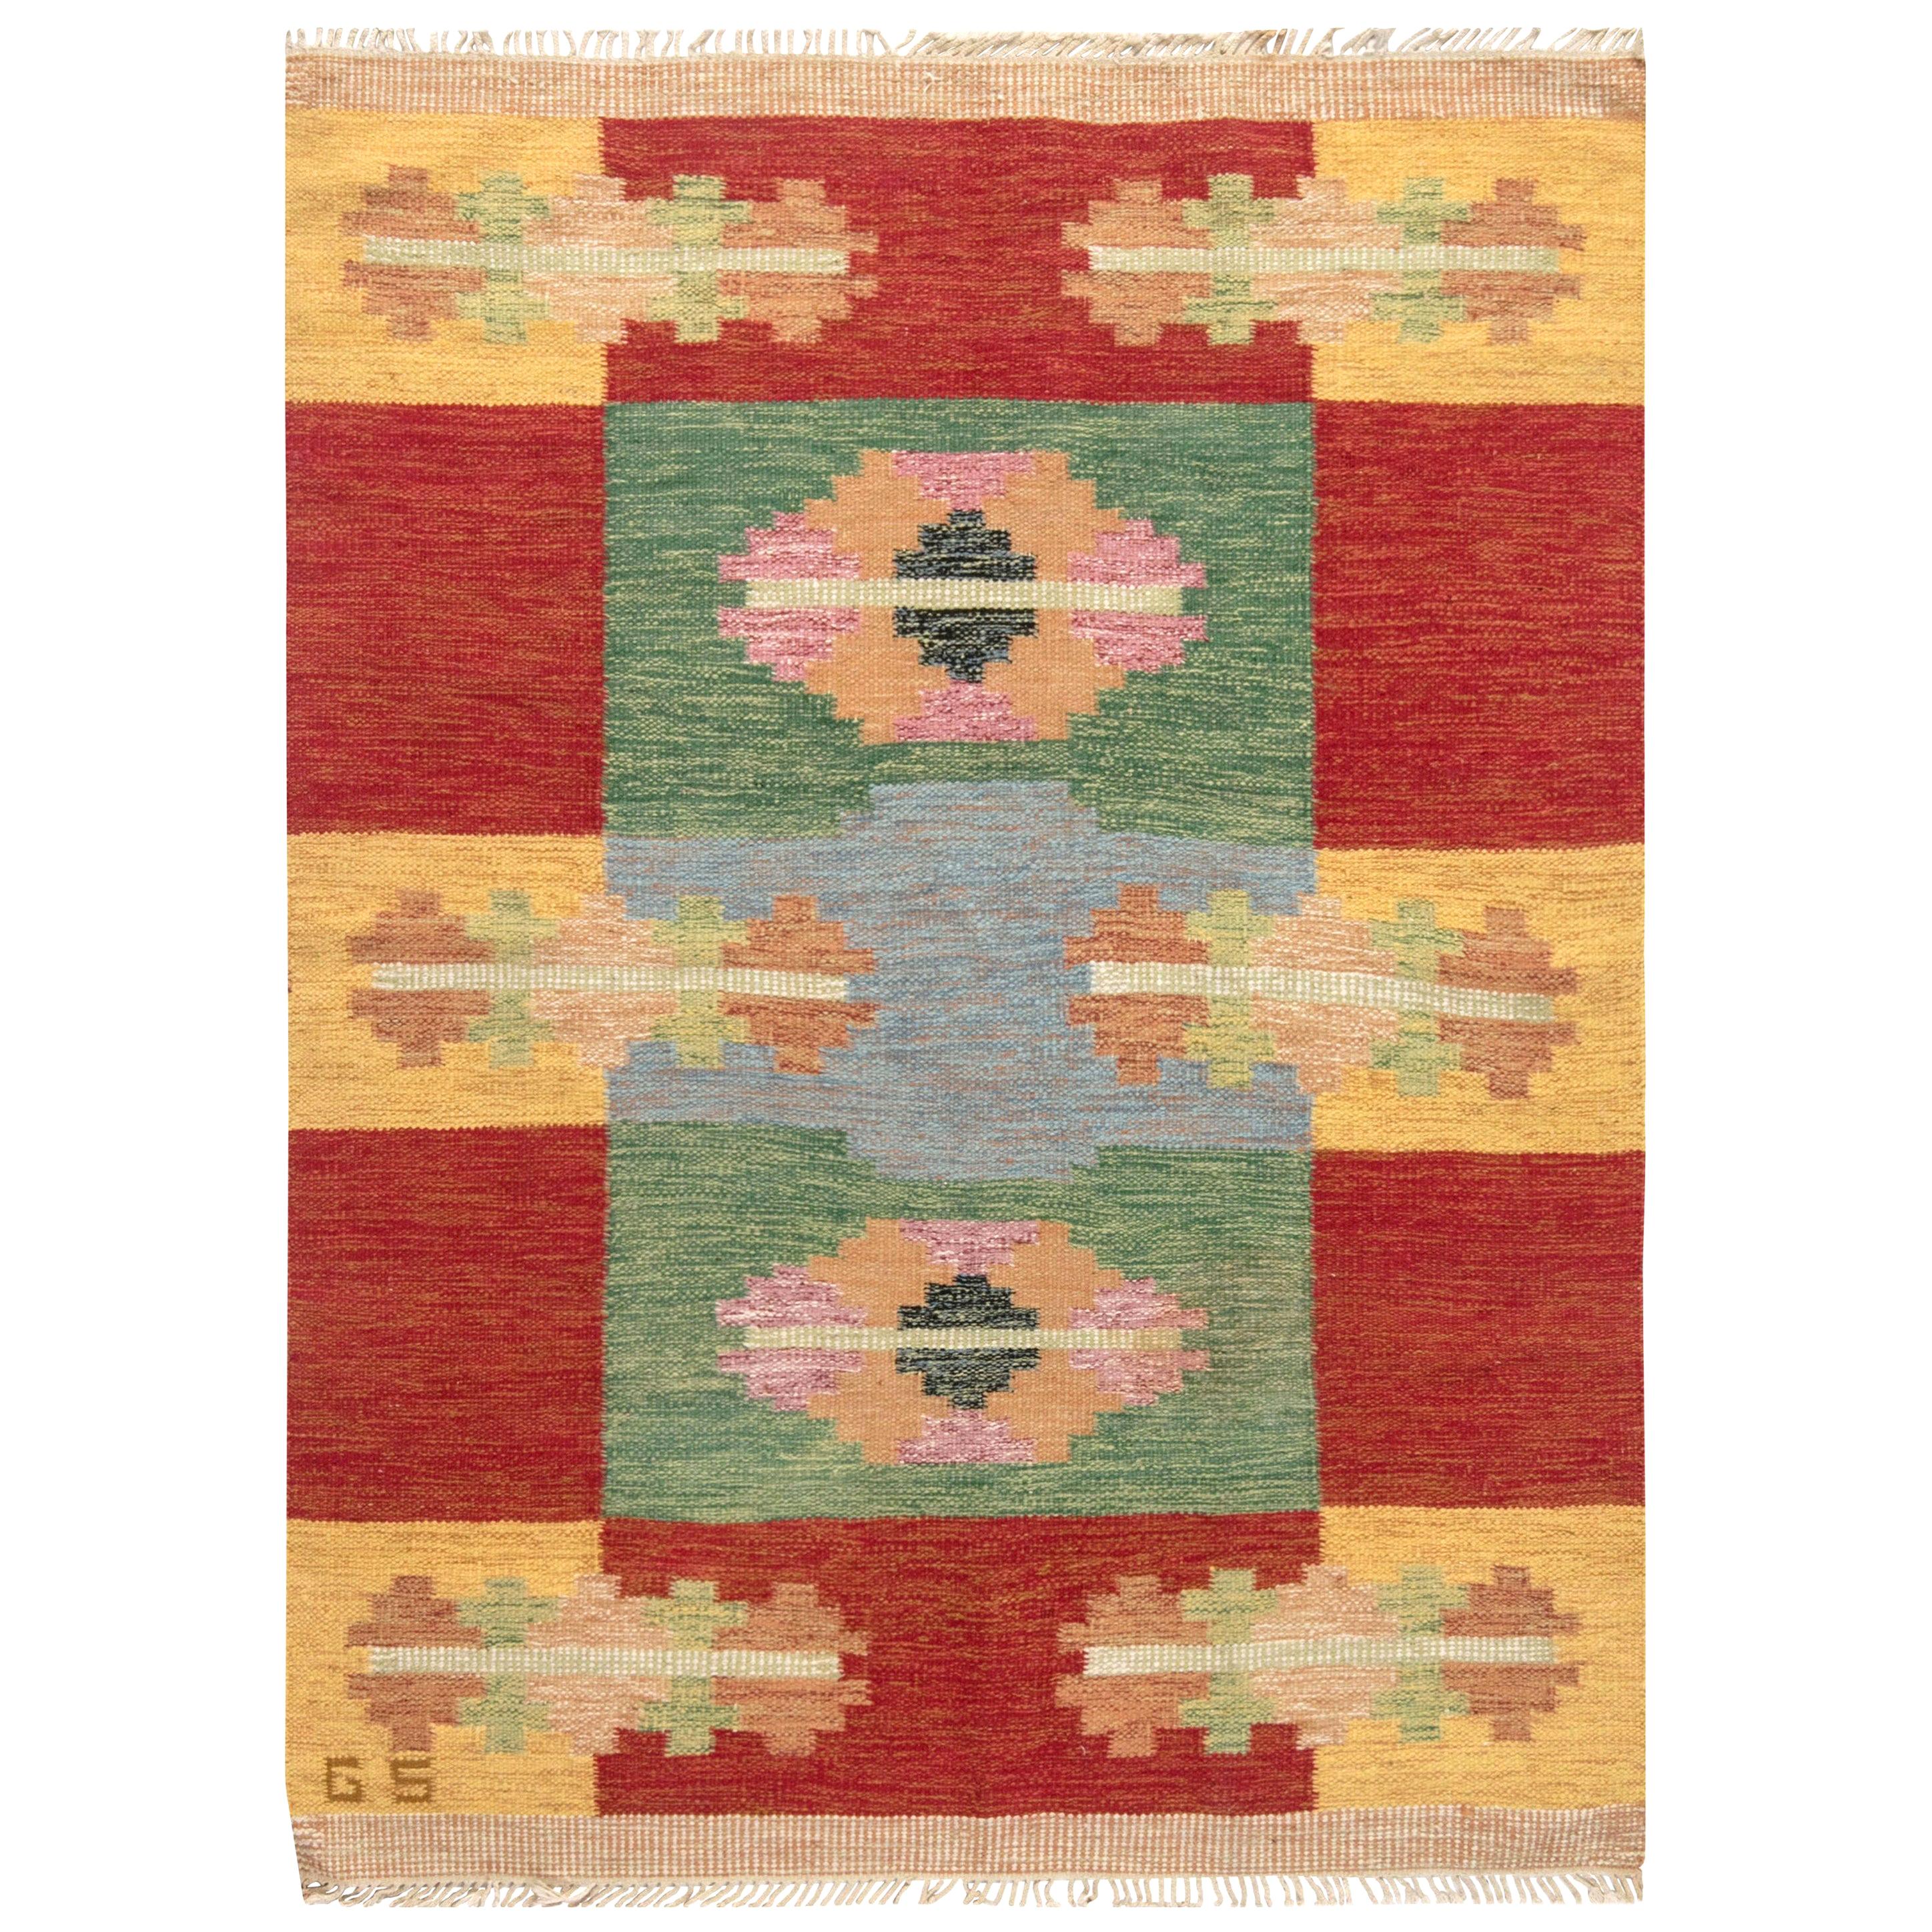 Midcentury Swedish red, yellow and green flat-weave runner by Sverker Greuholm
Size: 5'8